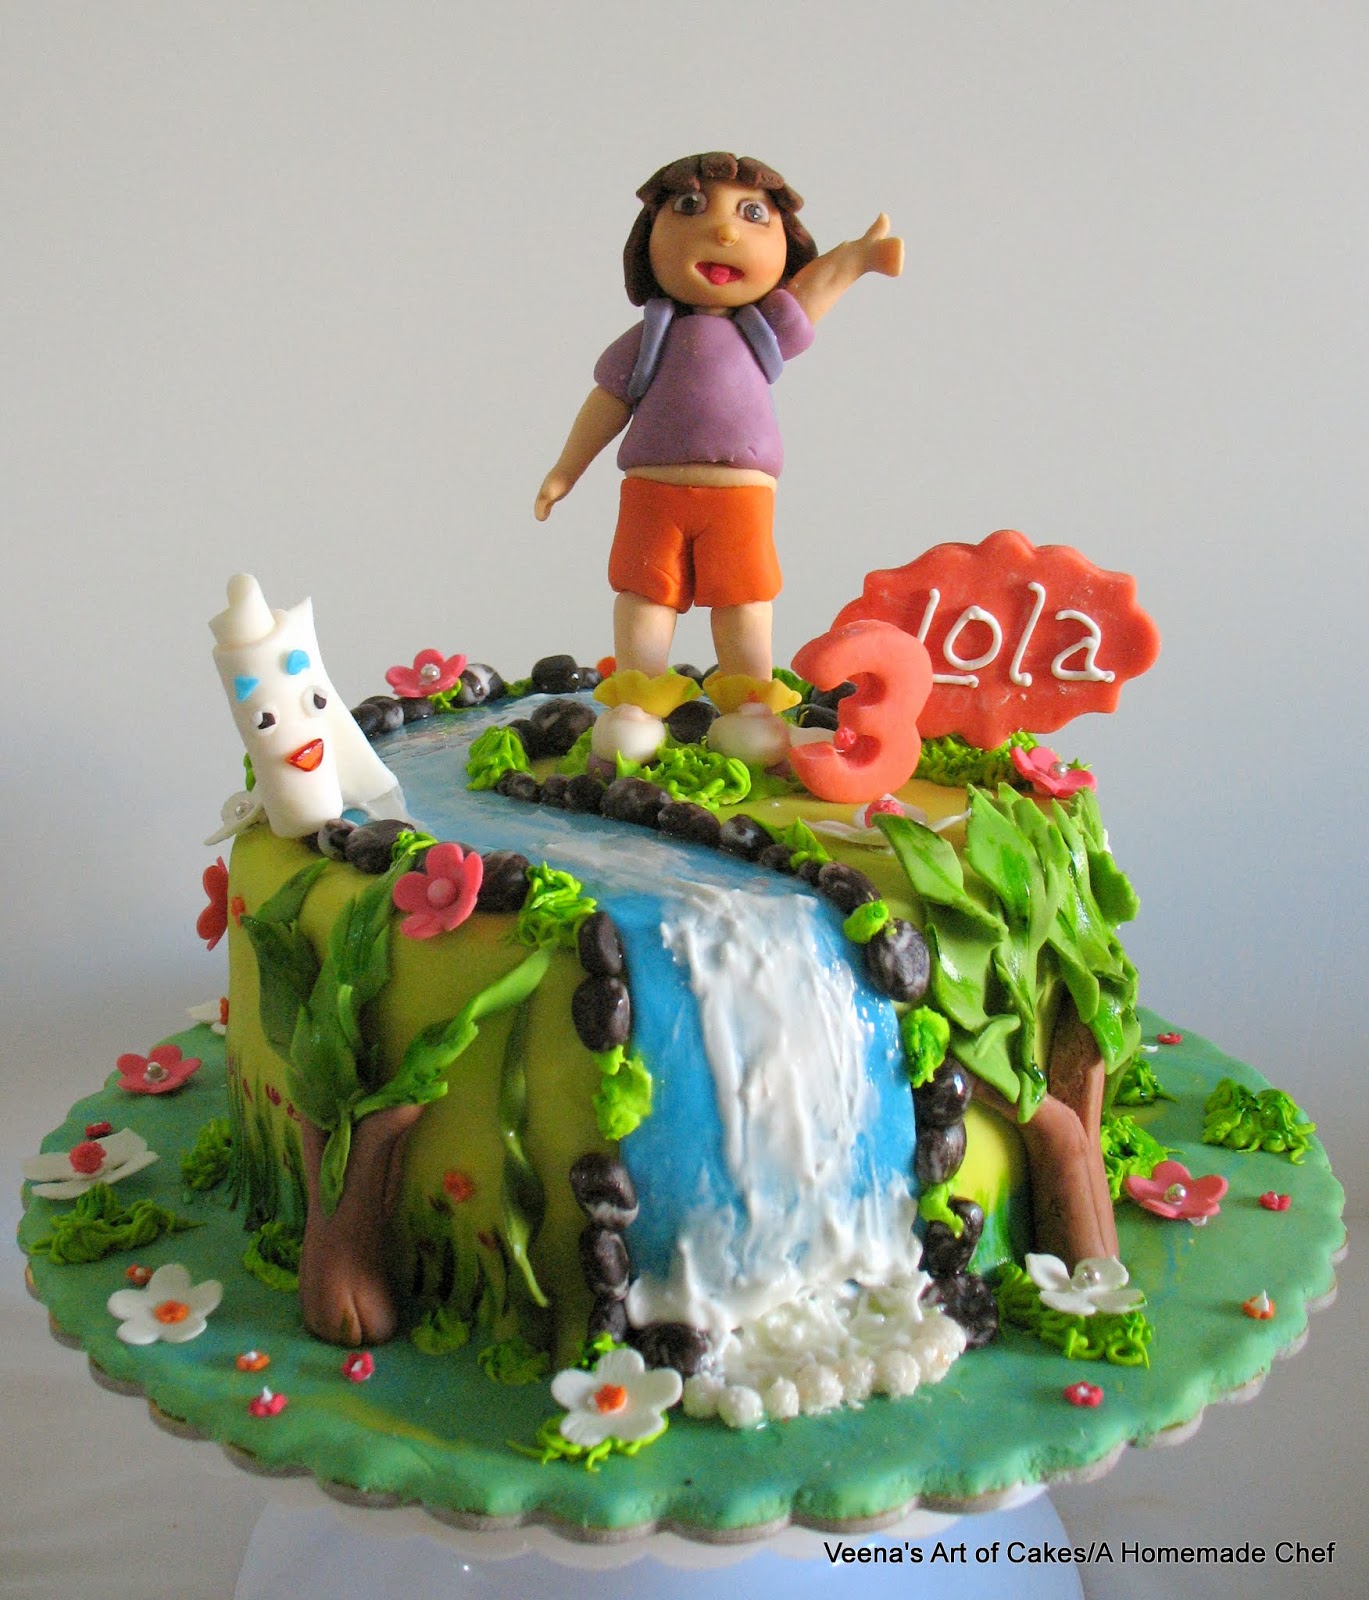 A cake decorated with Dora the explorer theme.